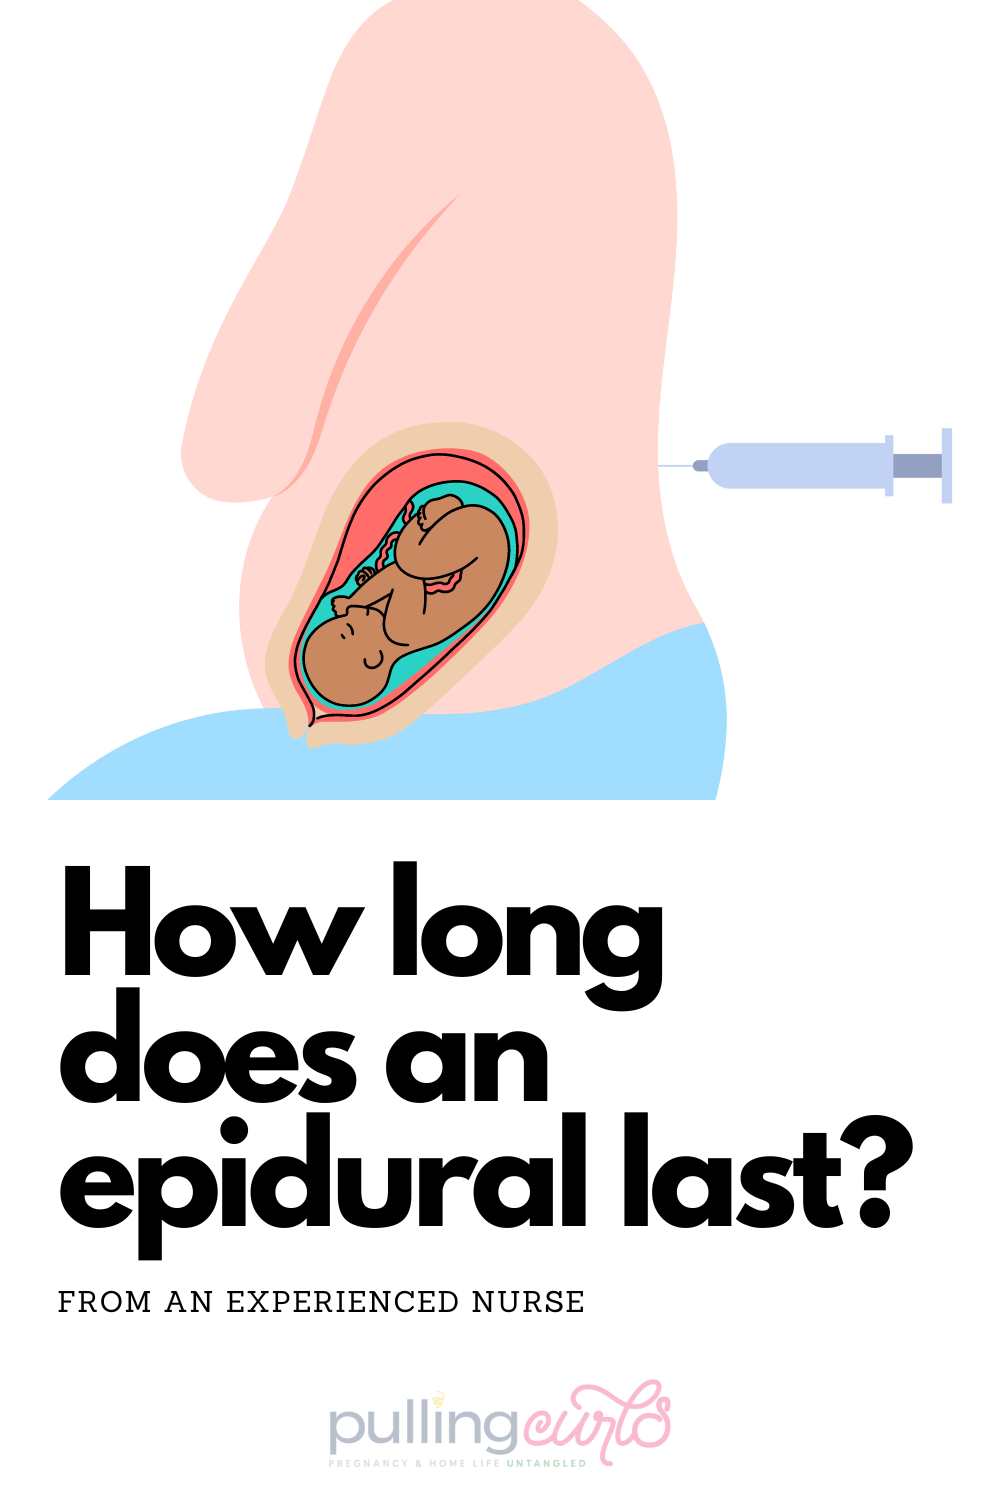 Epidurals are one of the most popular forms of pain relief during labor and childbirth, but just how long does an epidural last? While the effects of an epidural can vary from person to person, there are certain factors that can influence its duration. In this article, we'll explore the answers to this important question, so you can make an informed decision about your pain relief options. via @pullingcurls